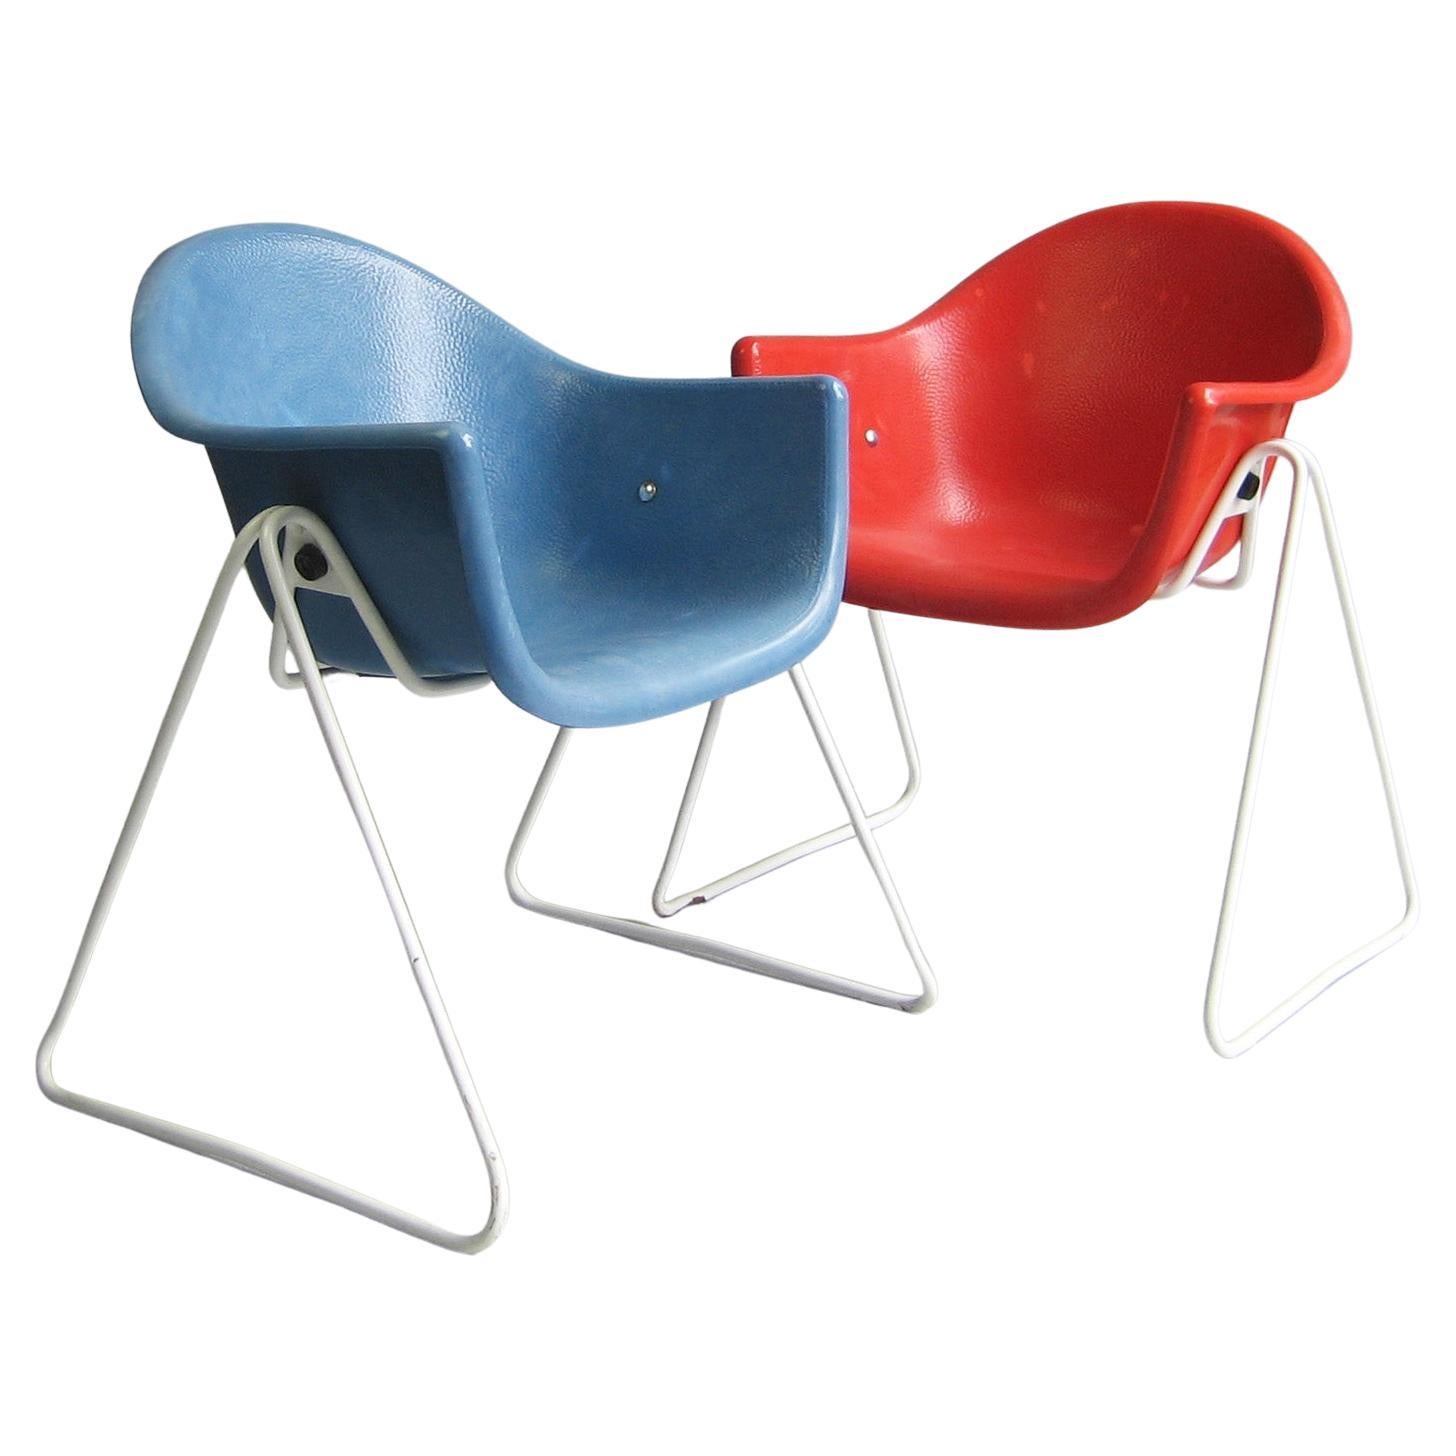 Pair of Walter Papst kids chairs, Wilkhahn, Germany 1961 - 1968